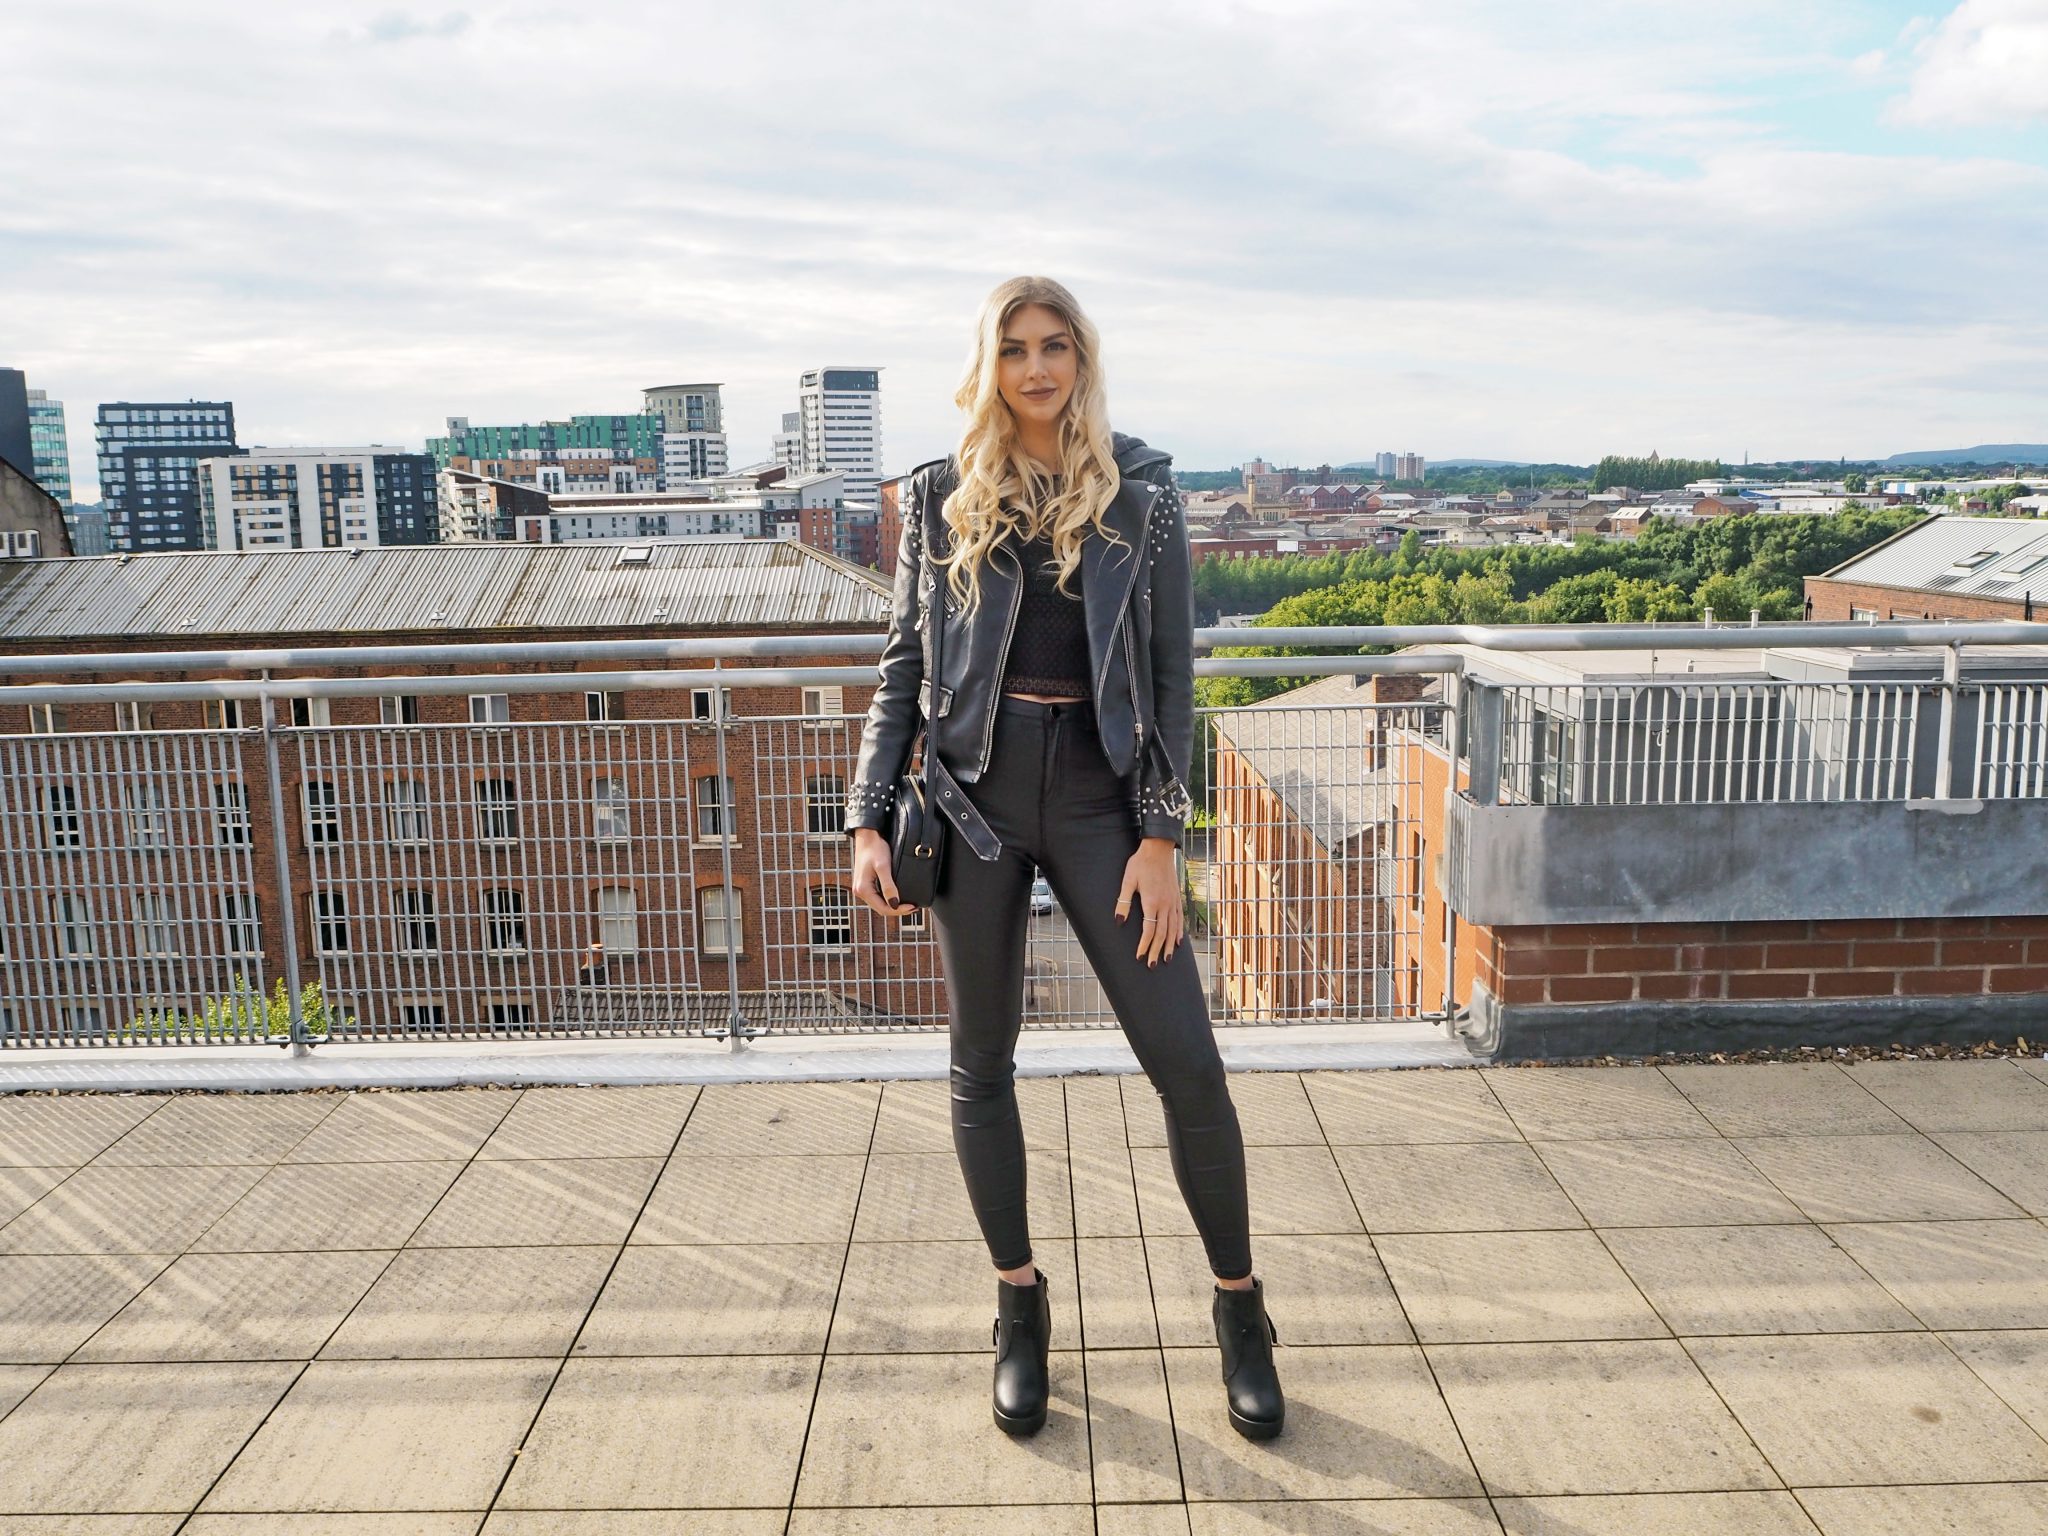 Laura Kate Lucas - Manchester Fashion, Fitness and Lifestyle Blogger | Outfit Post - Black Faux Leather Jeans, Heeled Biker Boots and Lace Crop Top